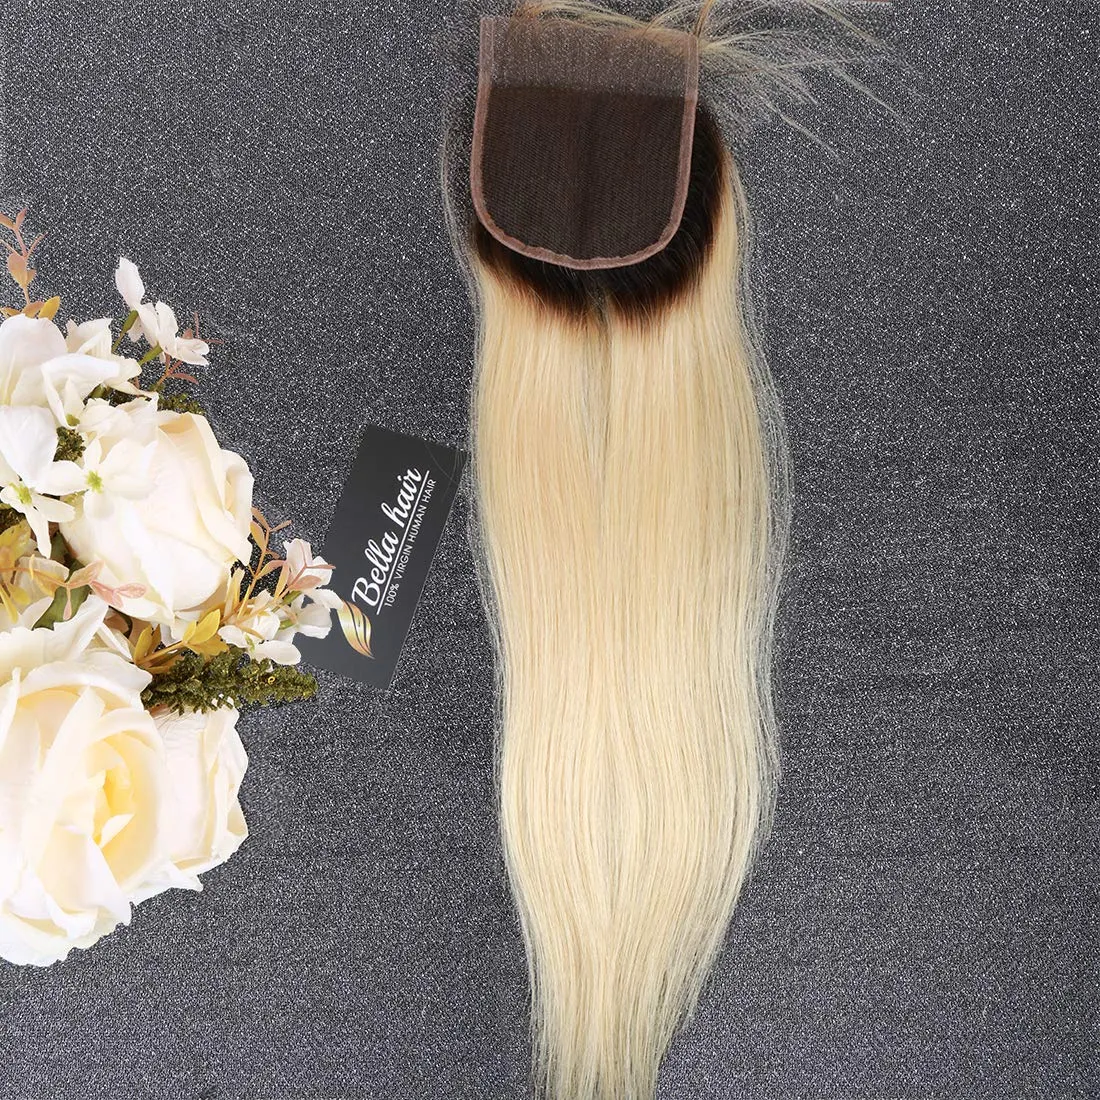 Bella Hair Silky Straight 1B/613 Dark Roots Blonde Lace Closure Remy Virgin Human Hair Closure Piece Free Part Ombre Blonde Two Tone Lace Closures with Baby Hair Goals